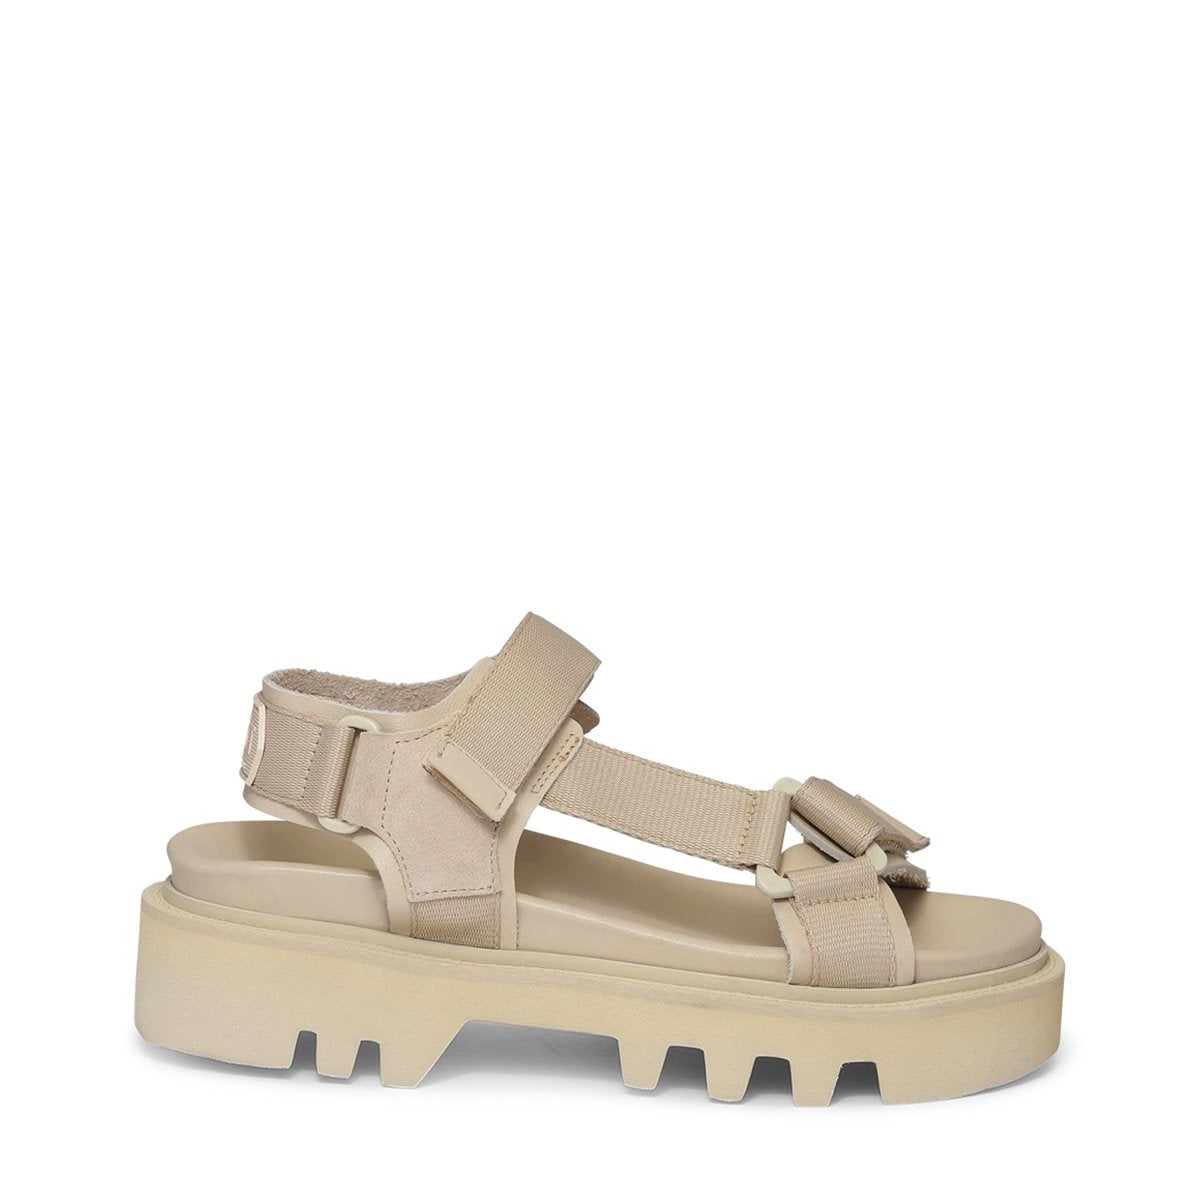 Candy Beige Chunky Sandals LAST1237 - 1